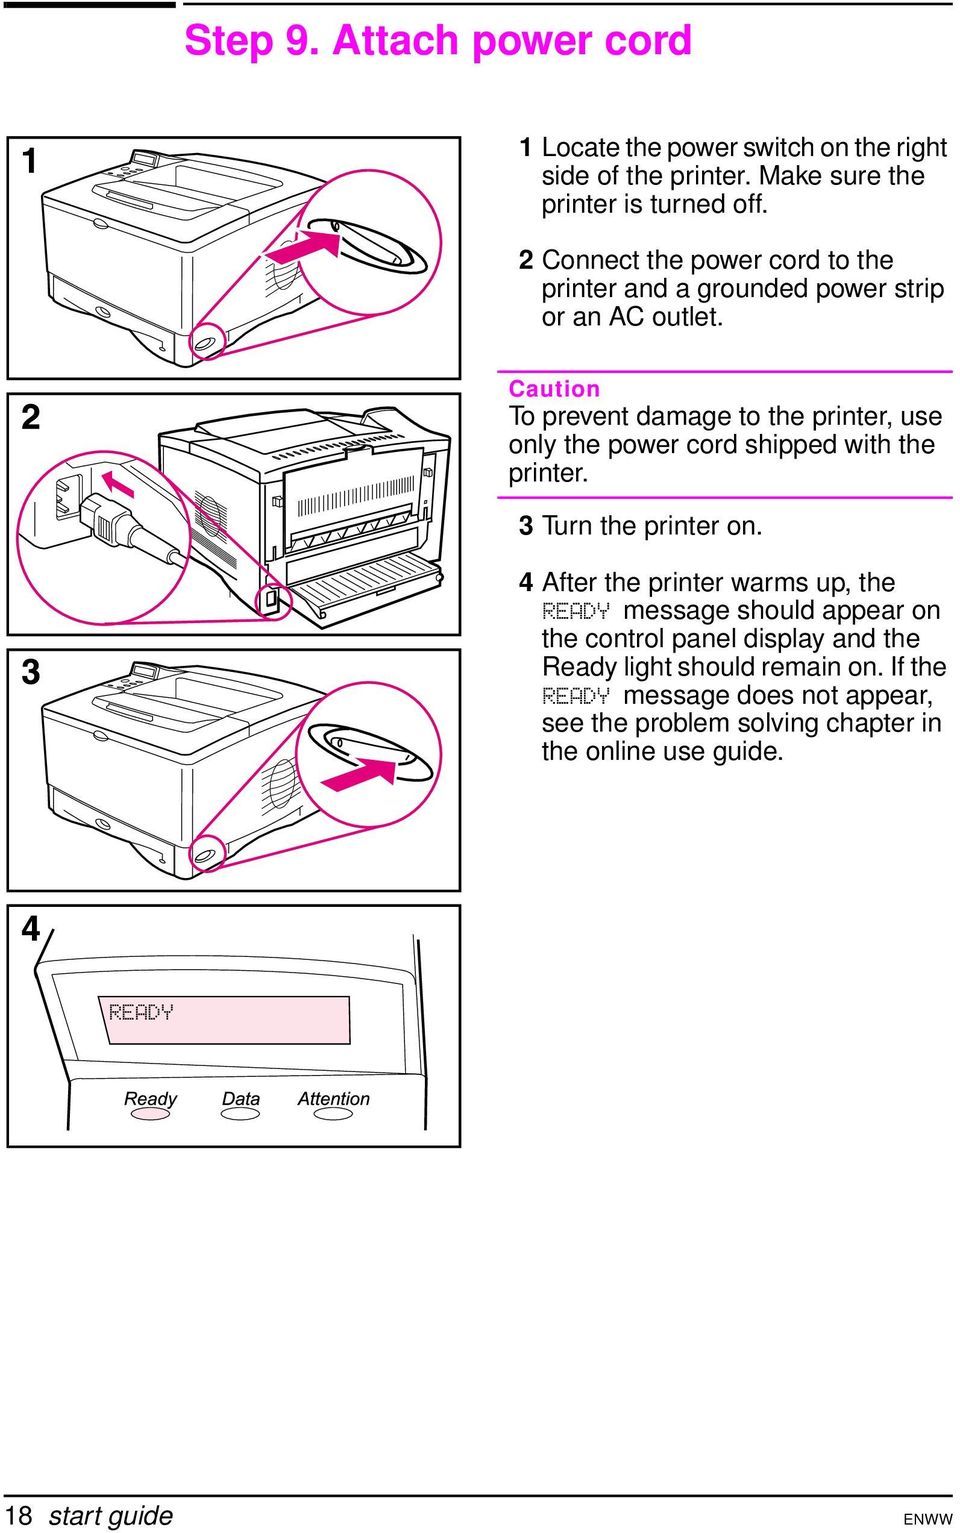 Caution To prevent damage to the printer, use only the power cord shipped with the printer. 3 Turn the printer on.